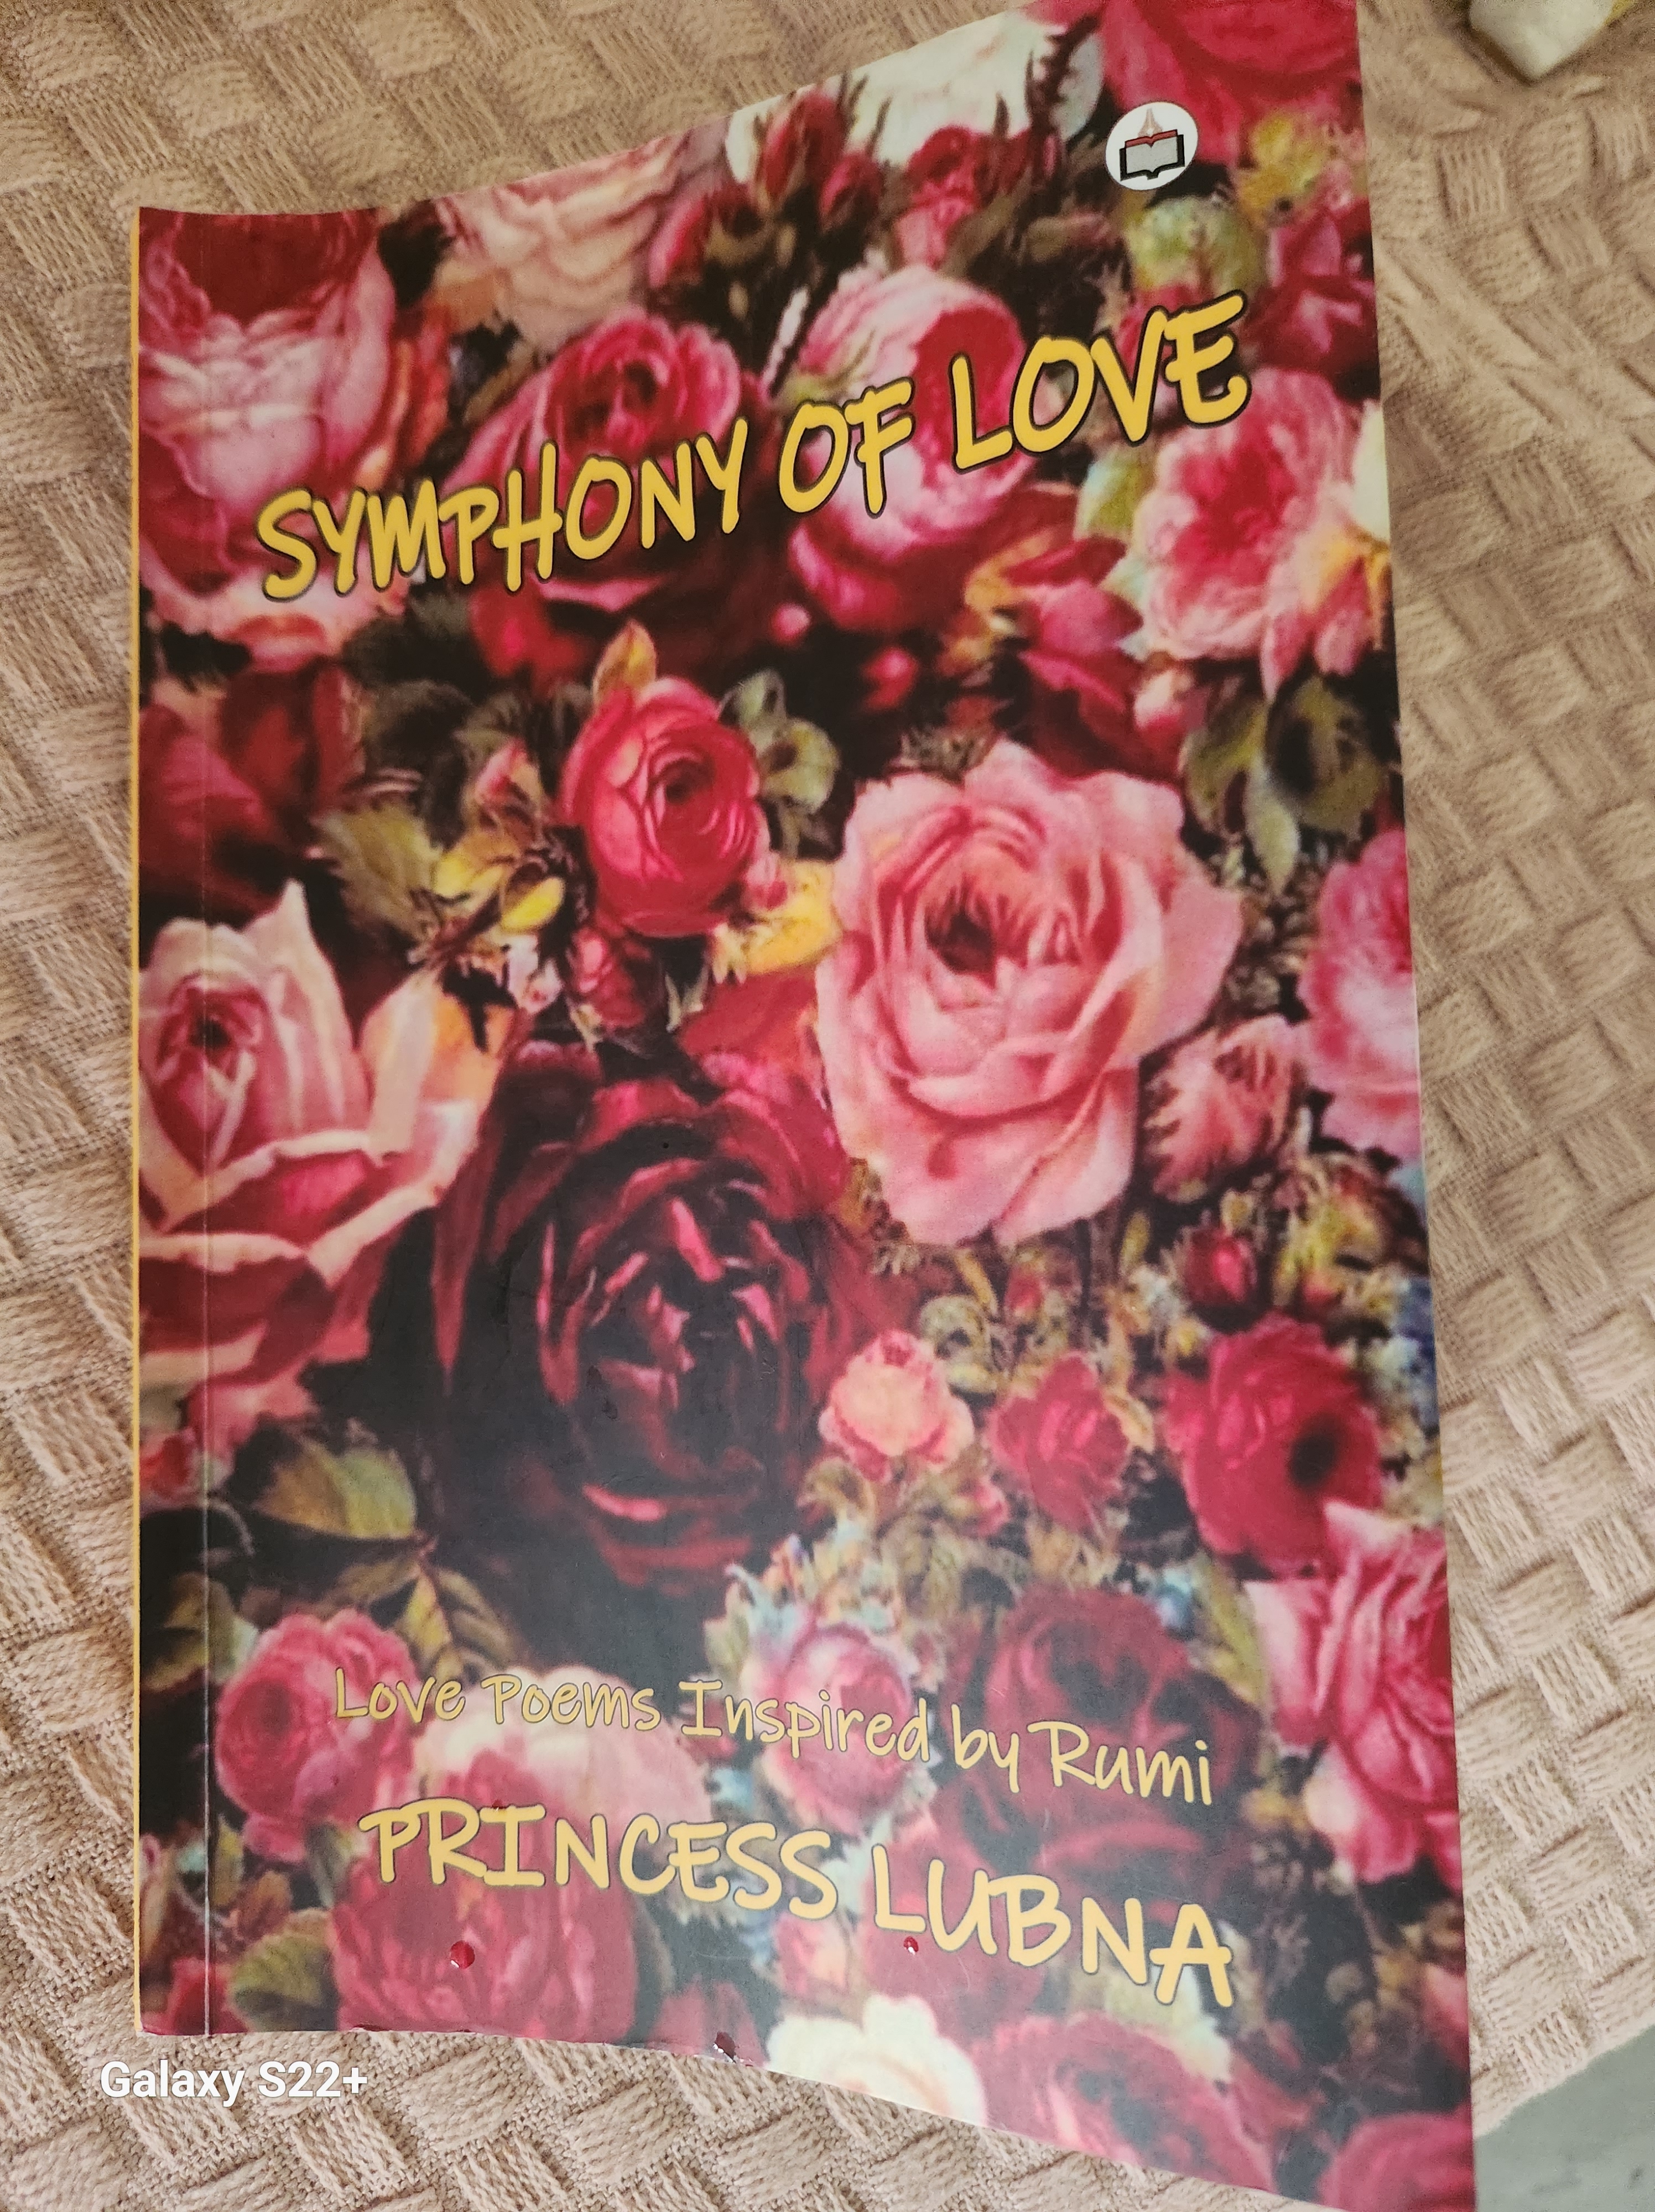 Book Review: Symphony of Love by Princess Lubna